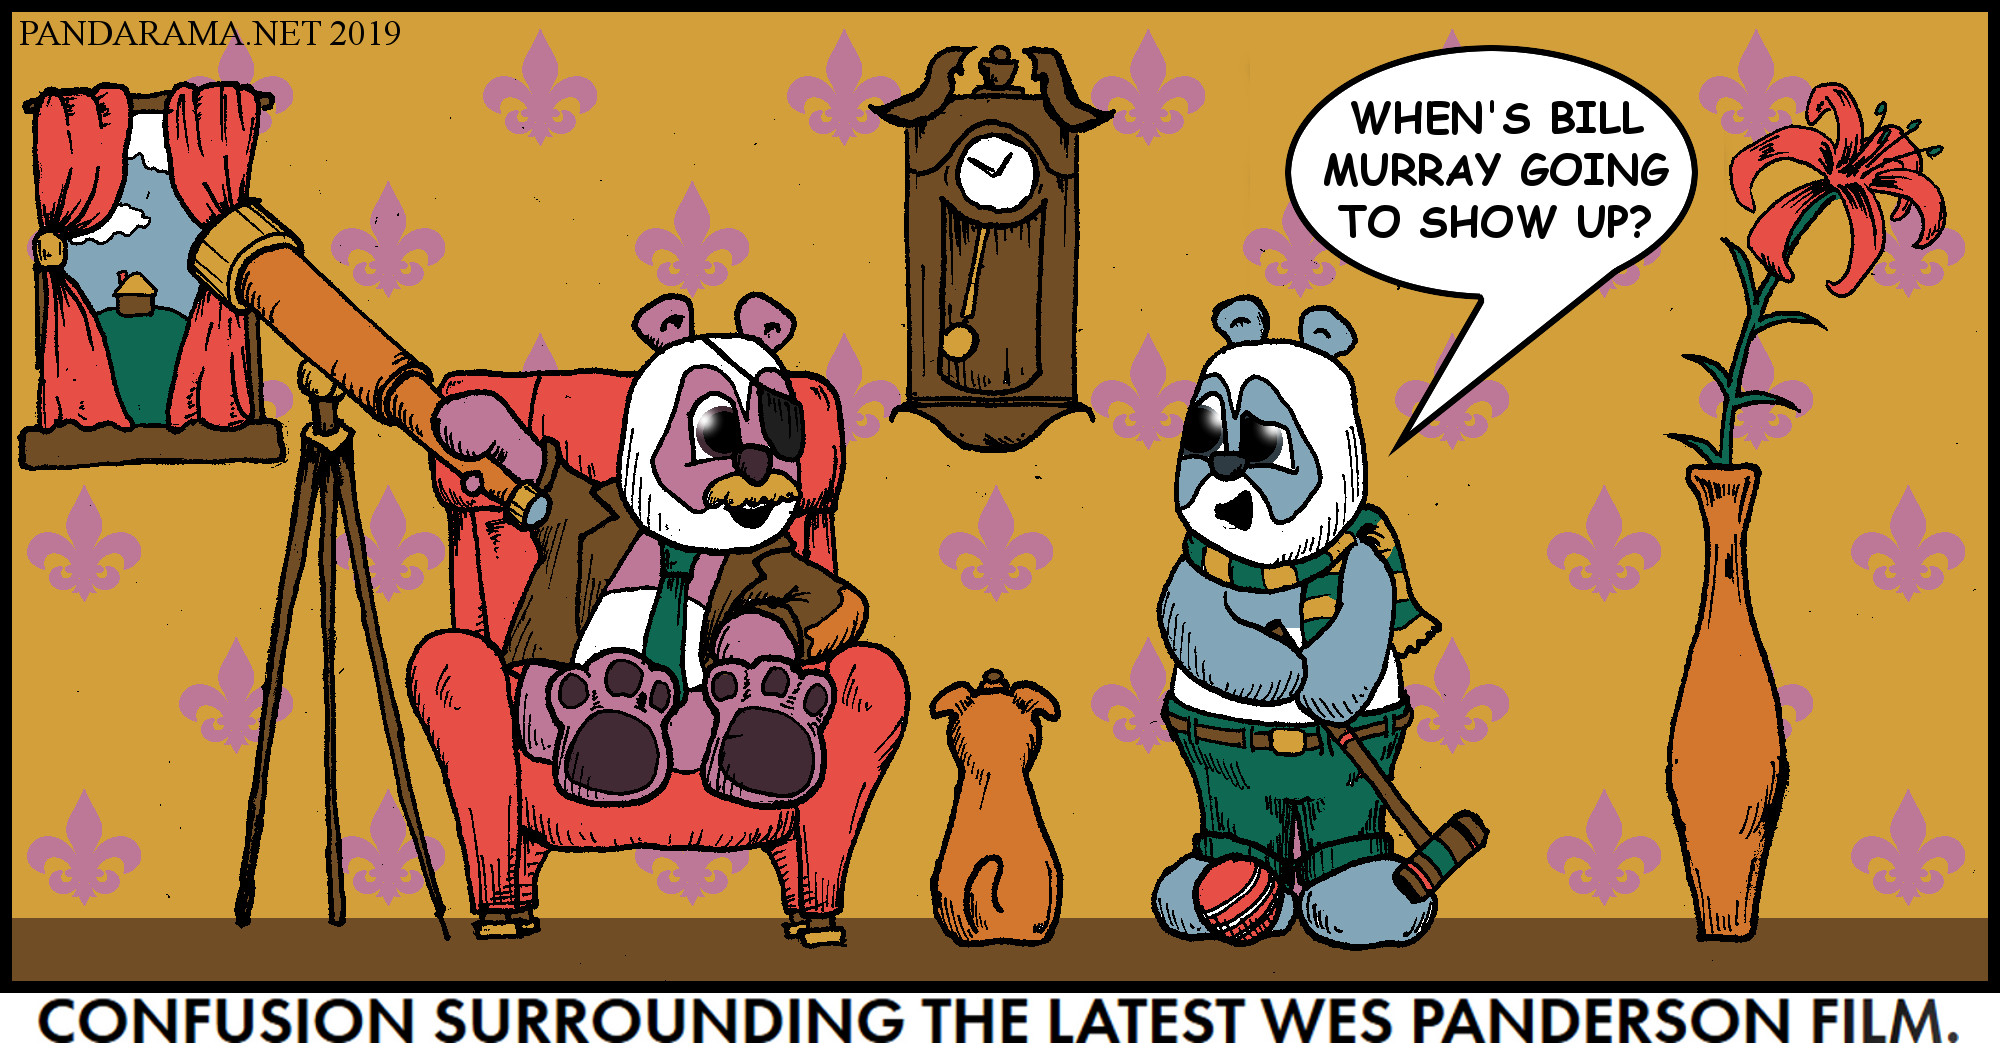 cartoon of pandas in wes anderson style waiting for bill murray appearance. wes panderson.